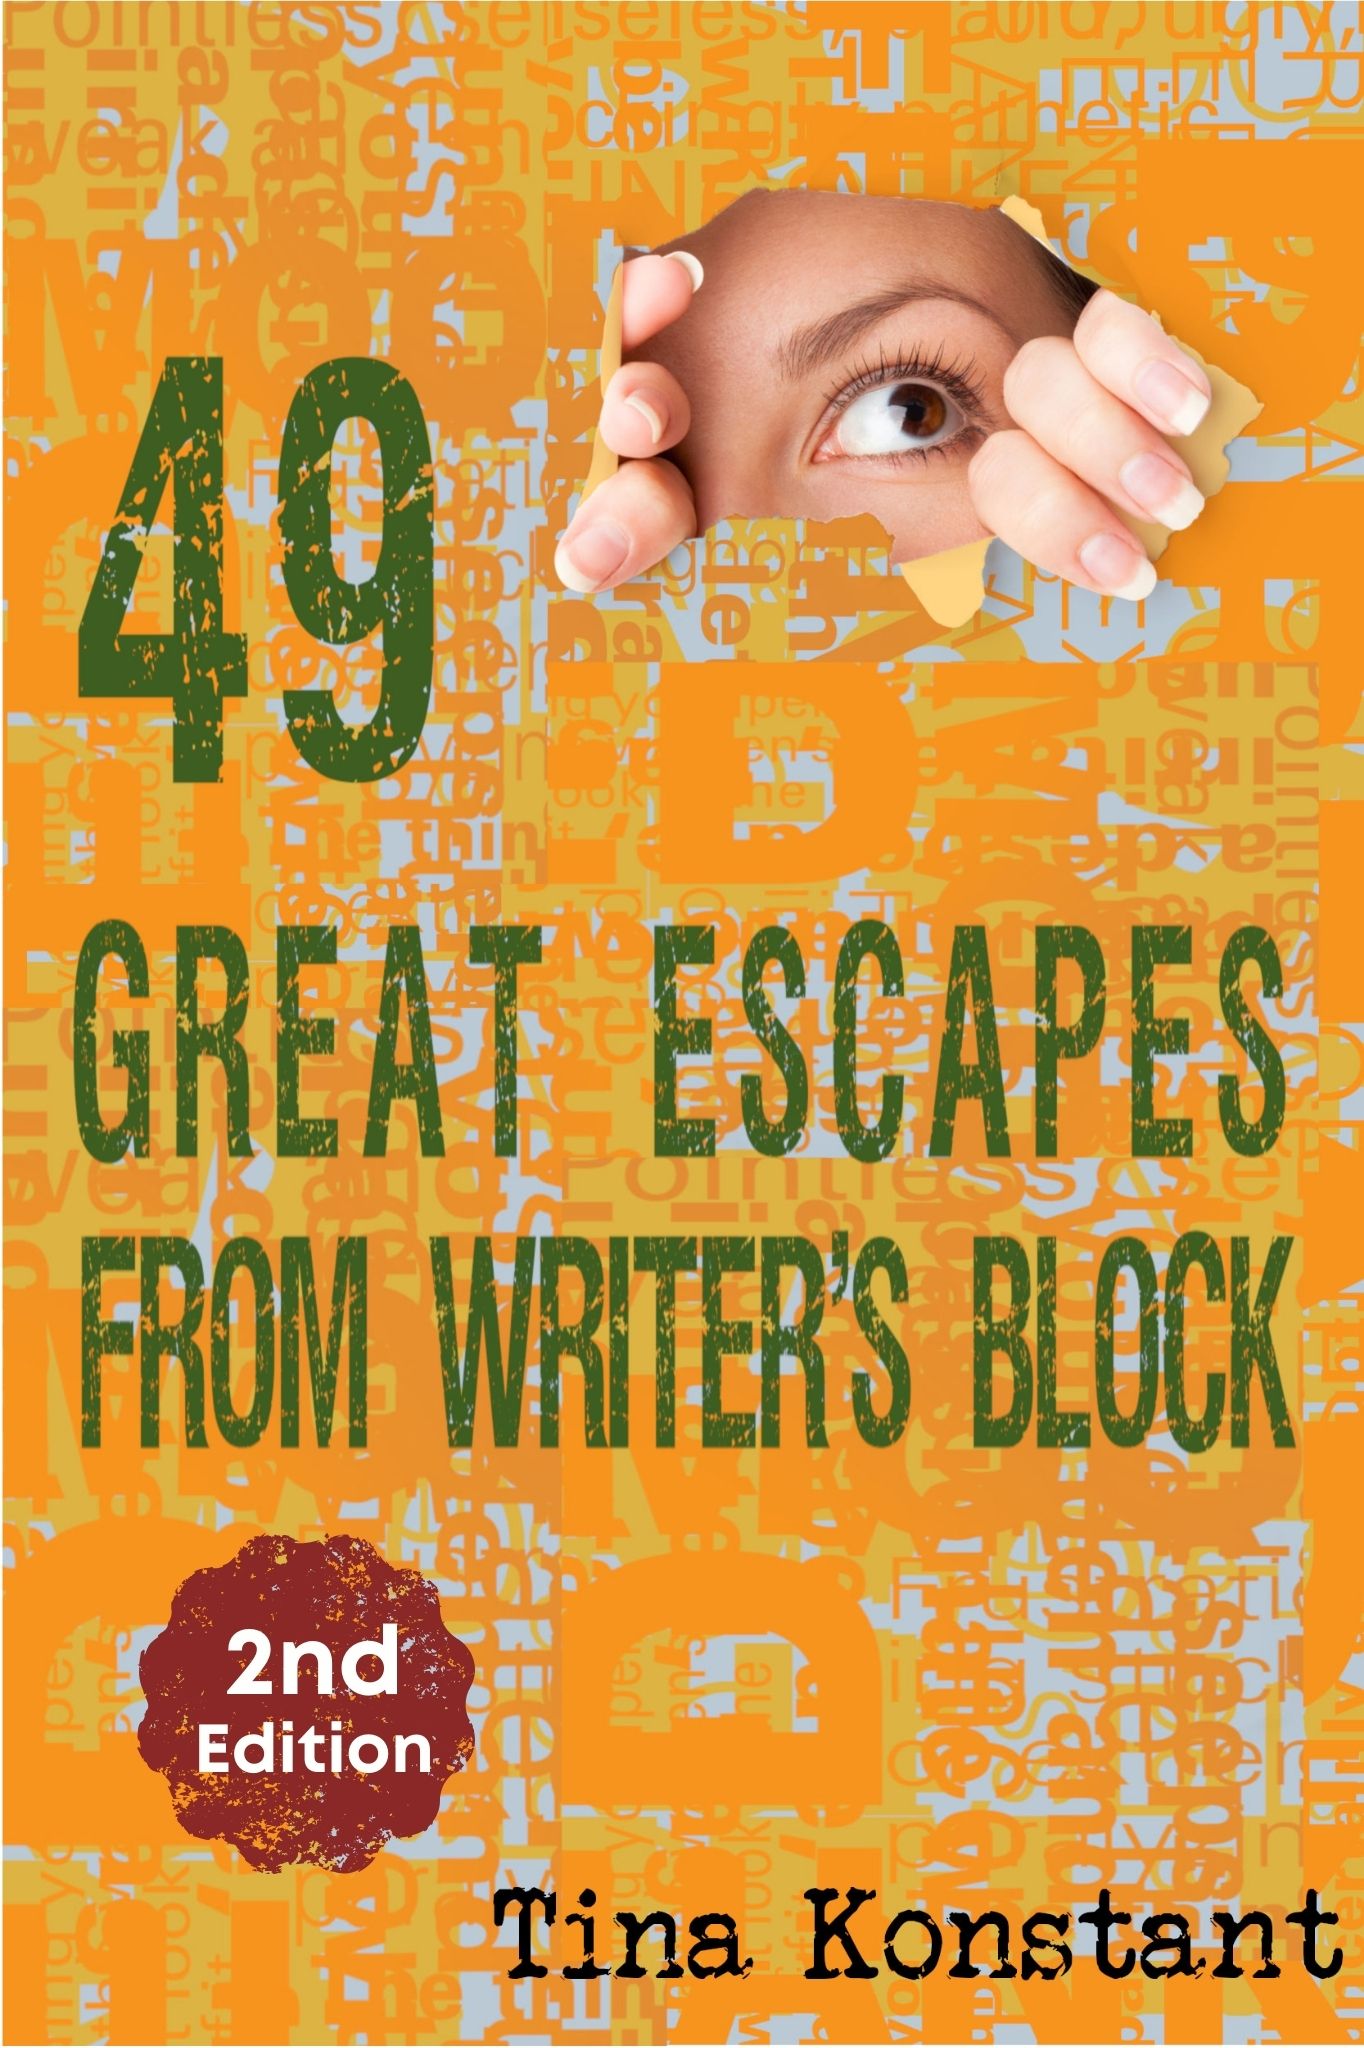 49 Great Escapes from Writer’s Block